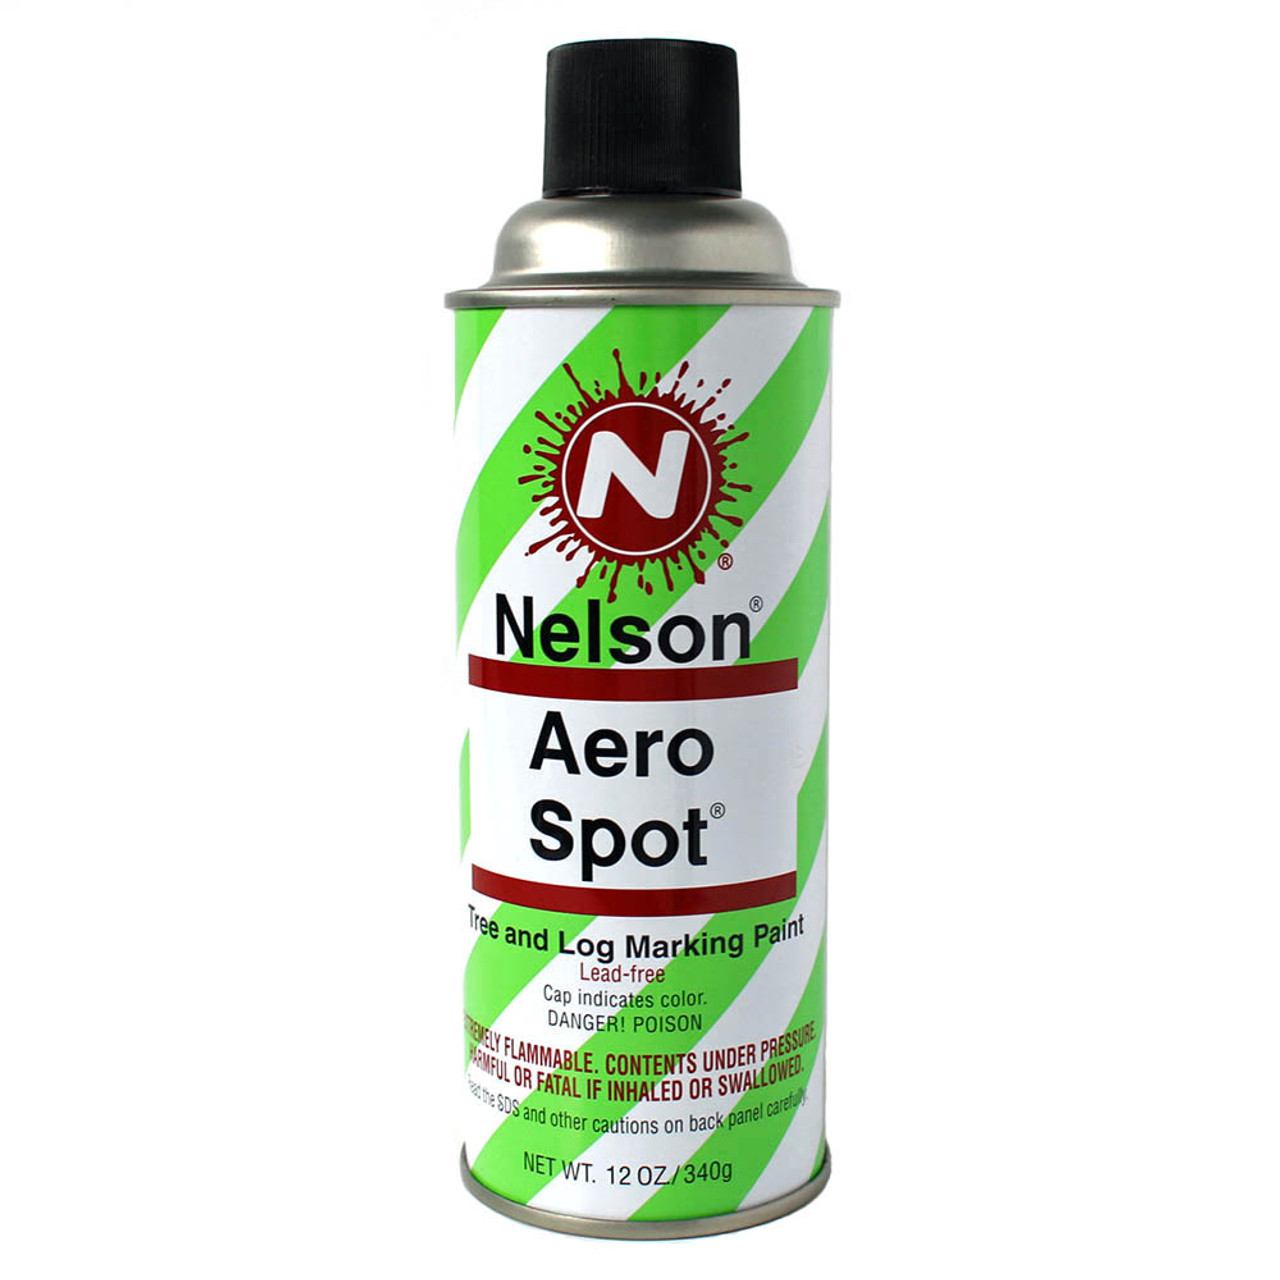 Nelson Aero Spot® Marking Paint 12 Oz Can Case of 24 - The Nelson Paint  Company